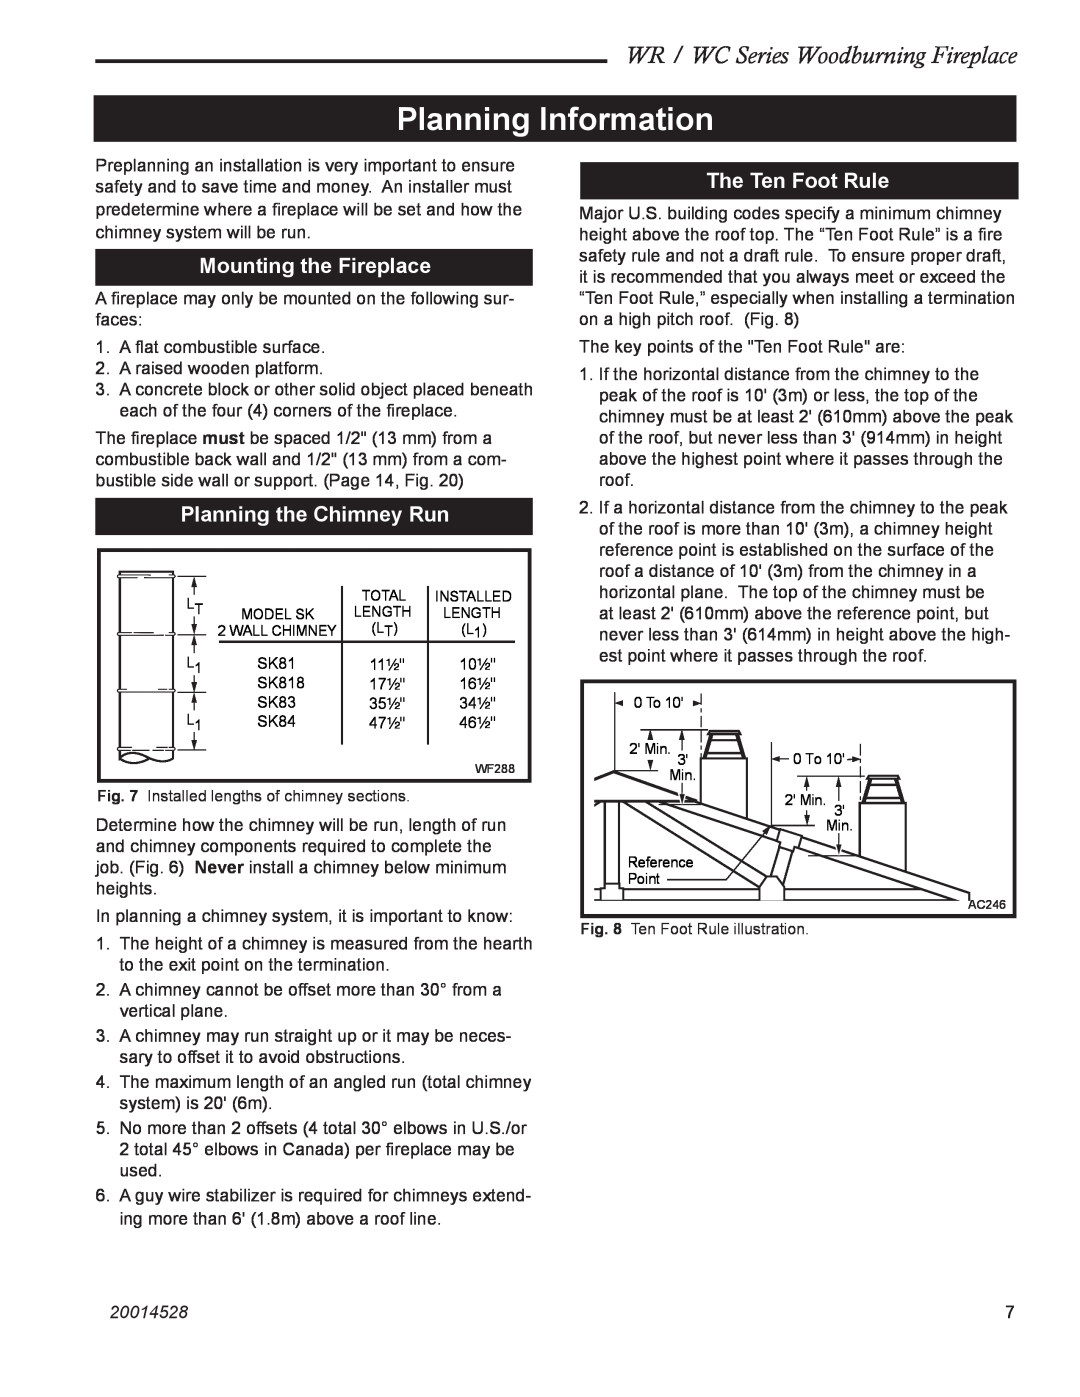 Monessen Hearth WC500 Planning Information, Mounting the Fireplace, Planning the Chimney Run, The Ten Foot Rule, 20014528 